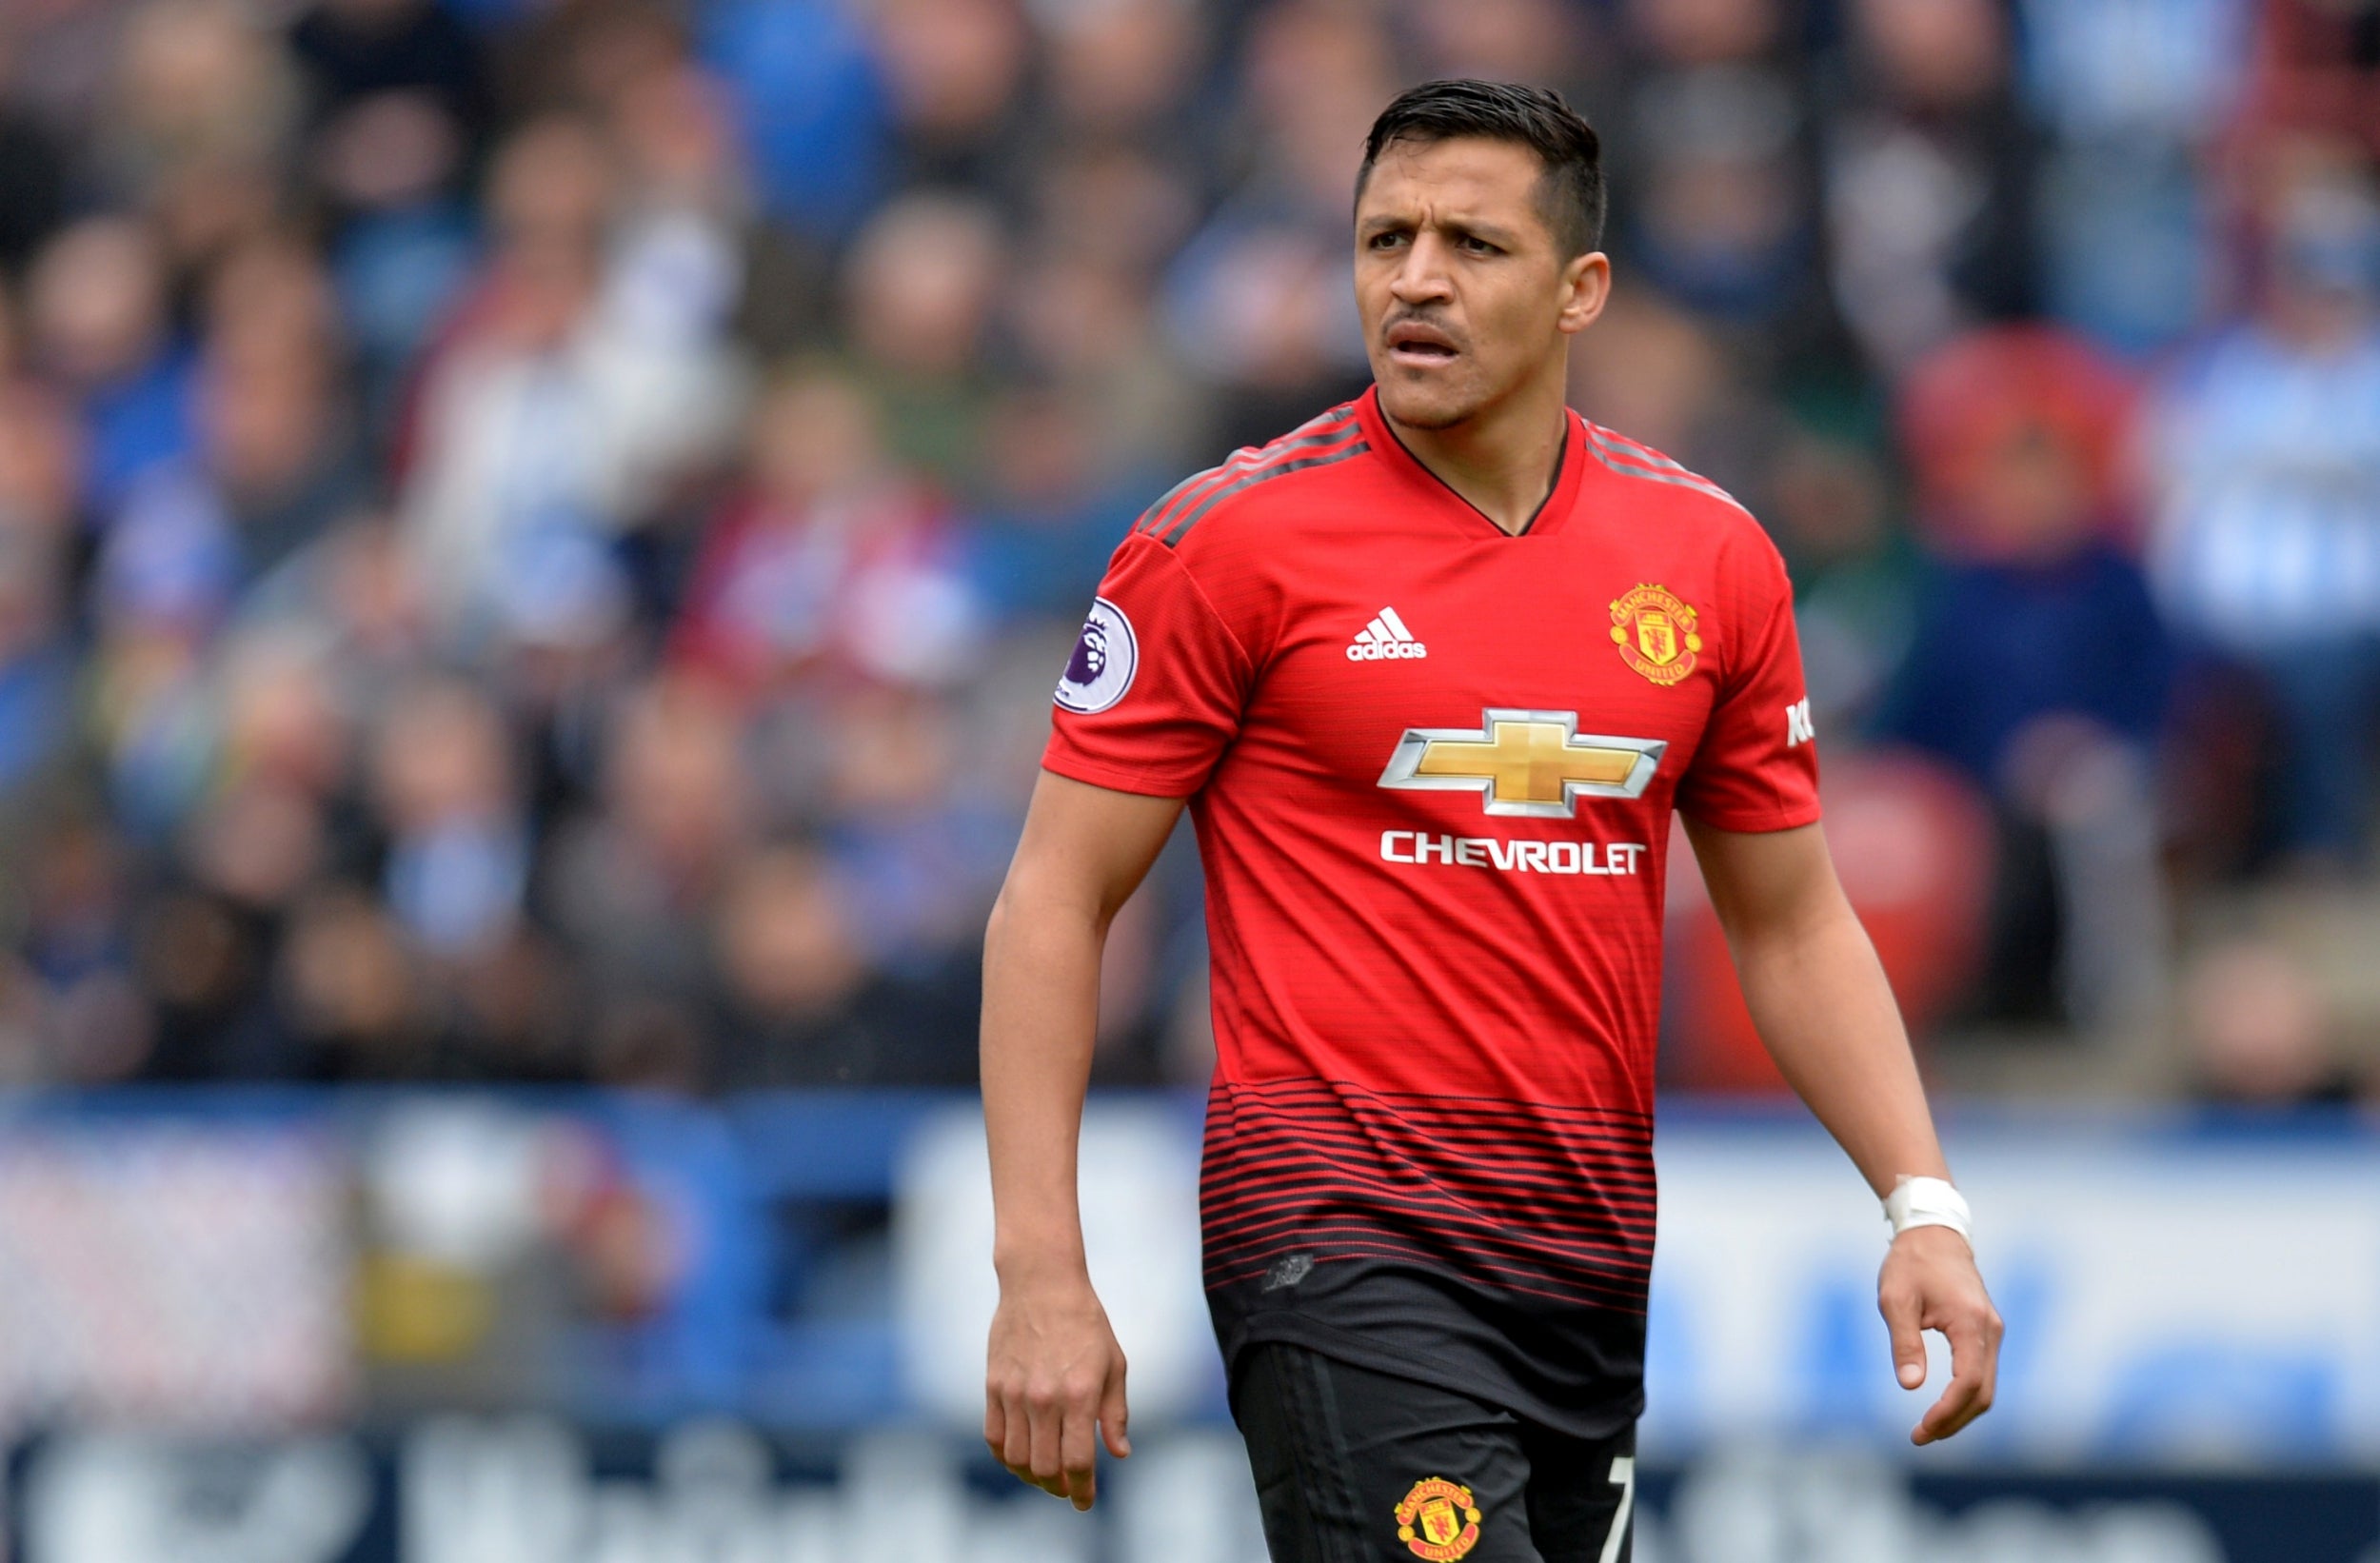 Sanchez's United career appears to be over